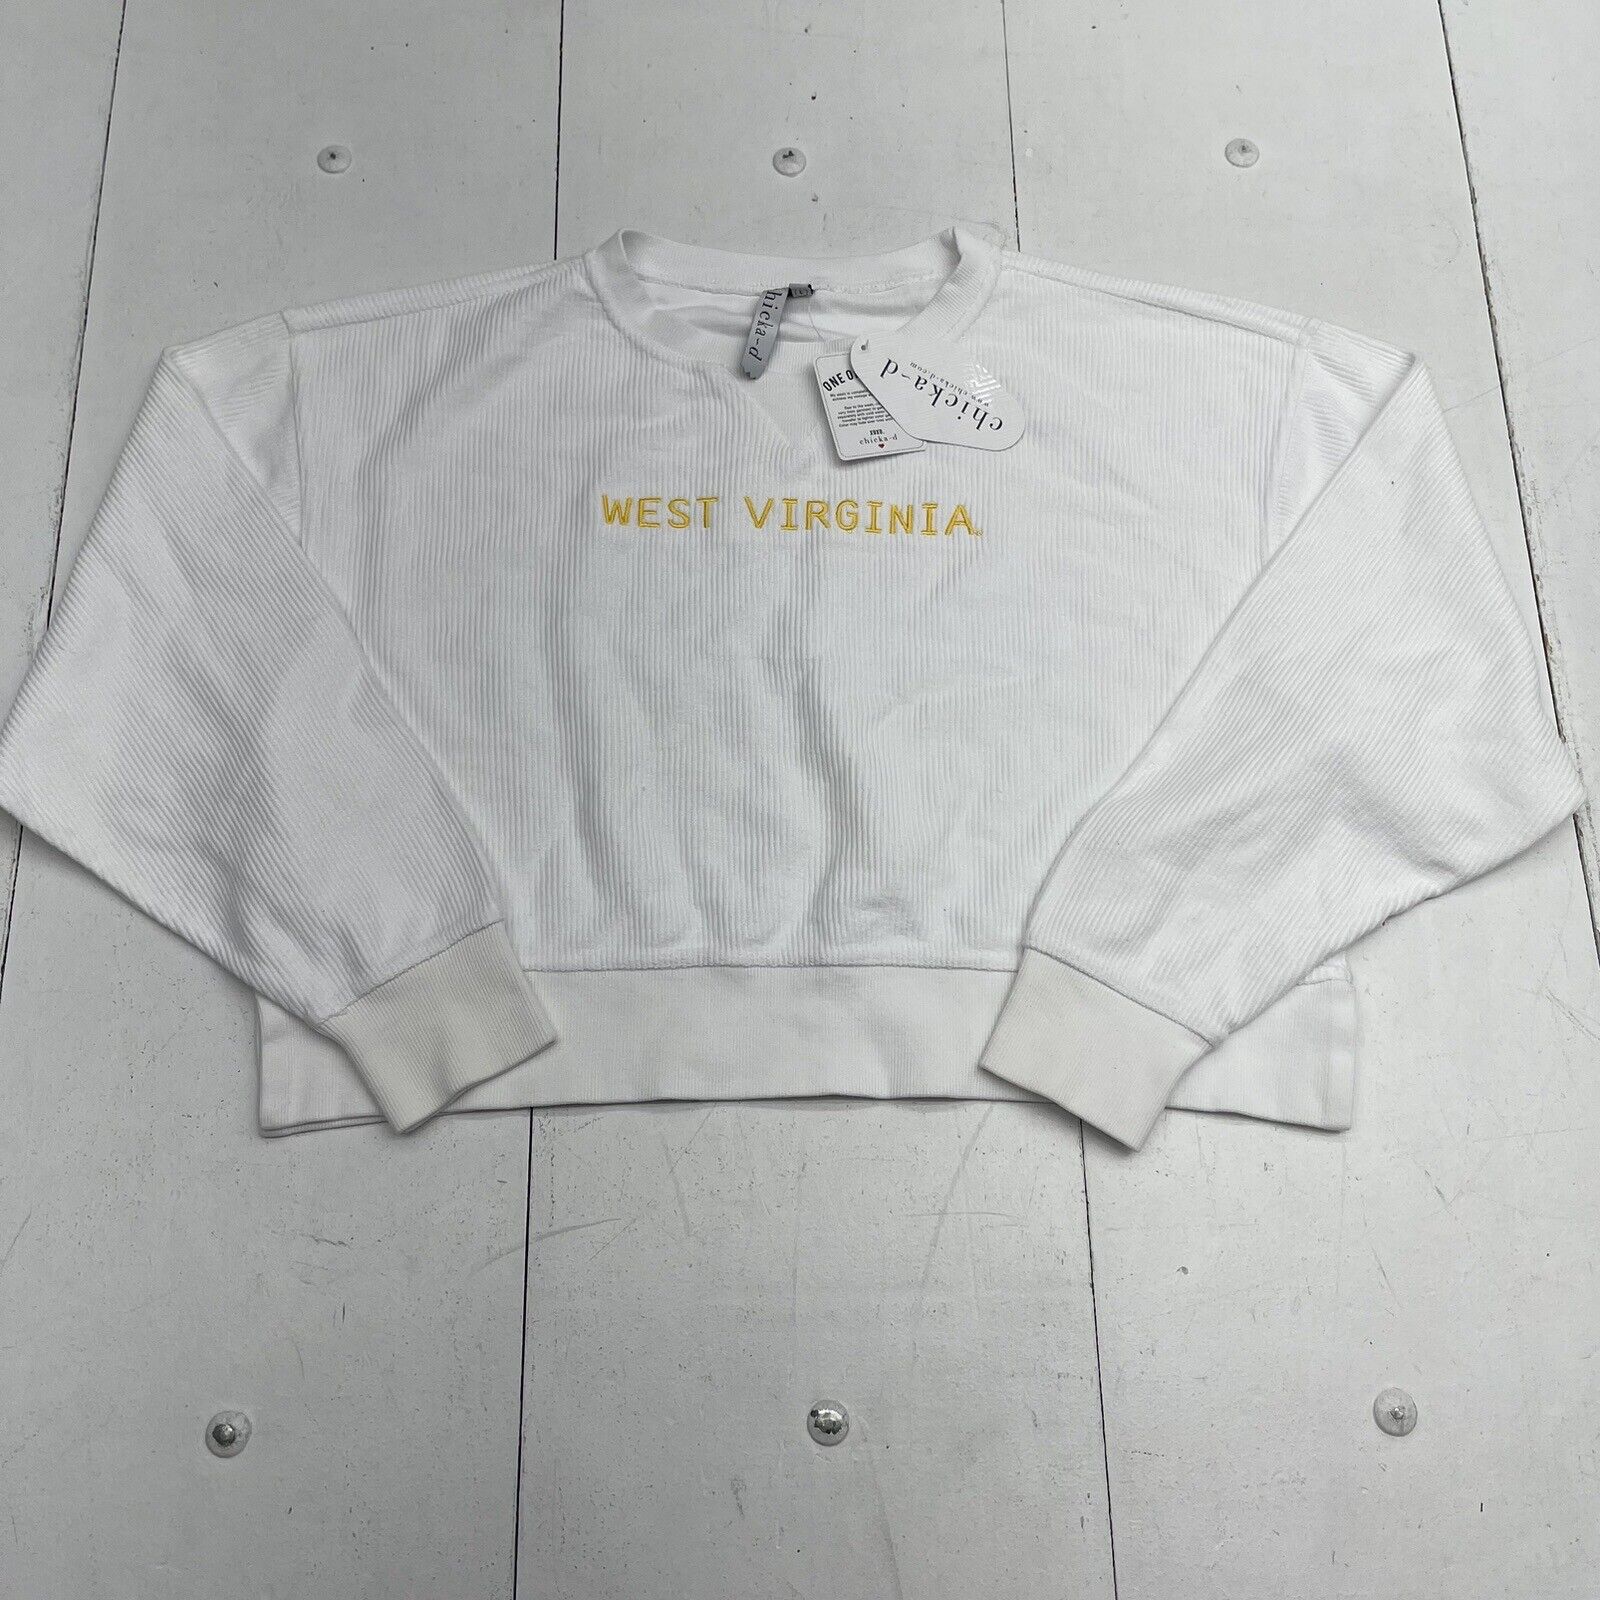 Chicka-d West Virginia White Corded Sweatshirt Women’s Size Large New